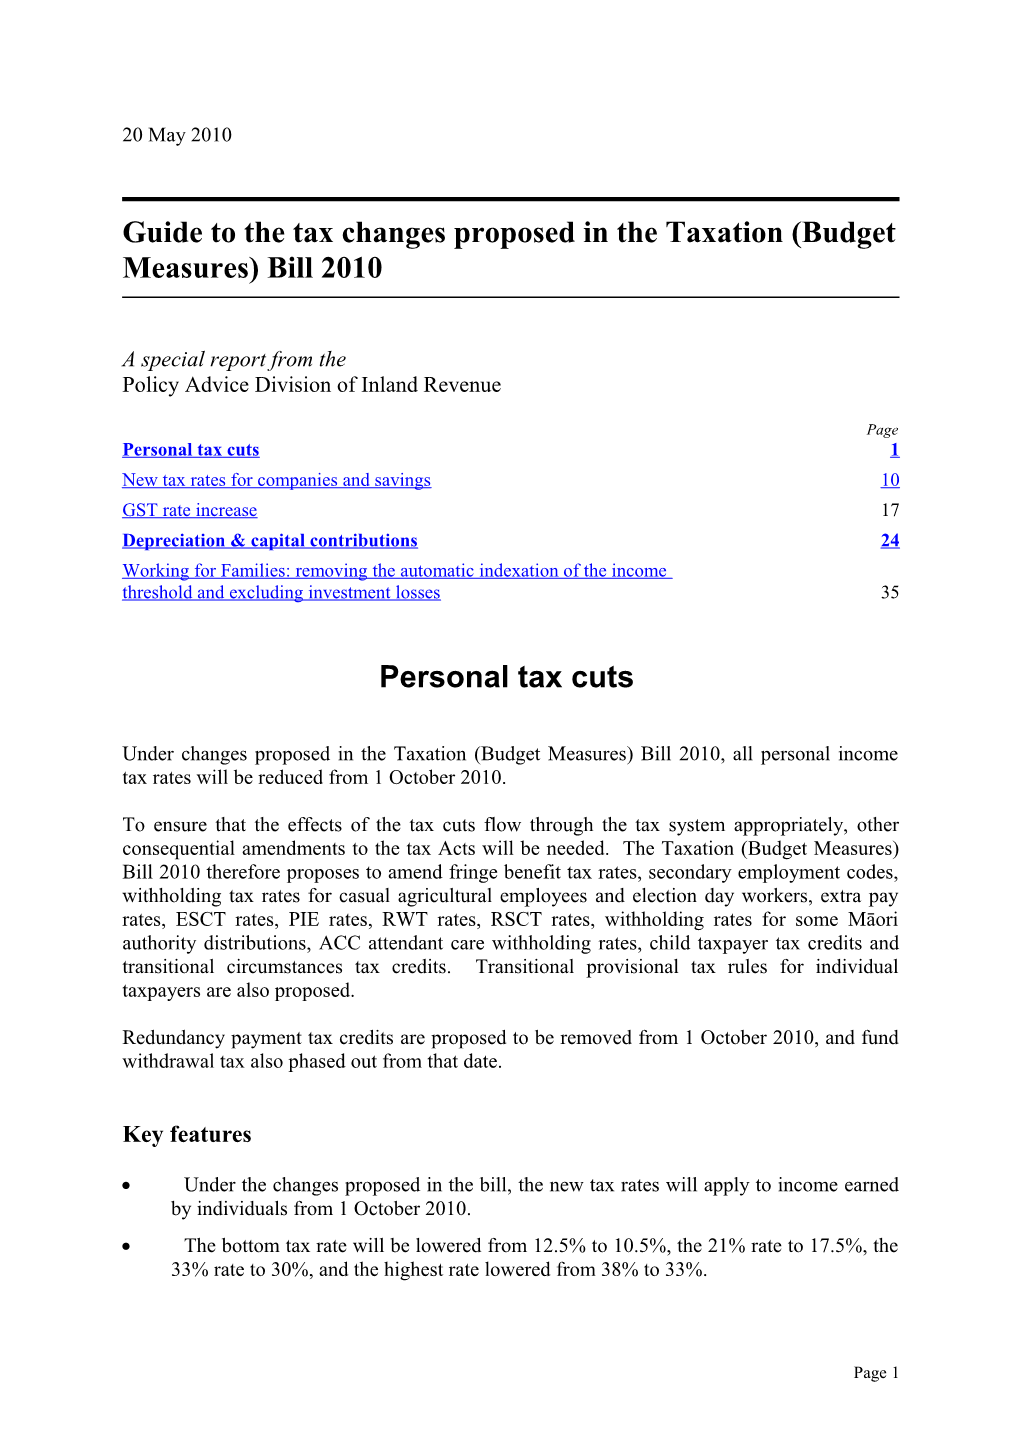 Special Report: Guide to the Tax Changes Proposed in the Taxation (Budget Measures) Bill 2010